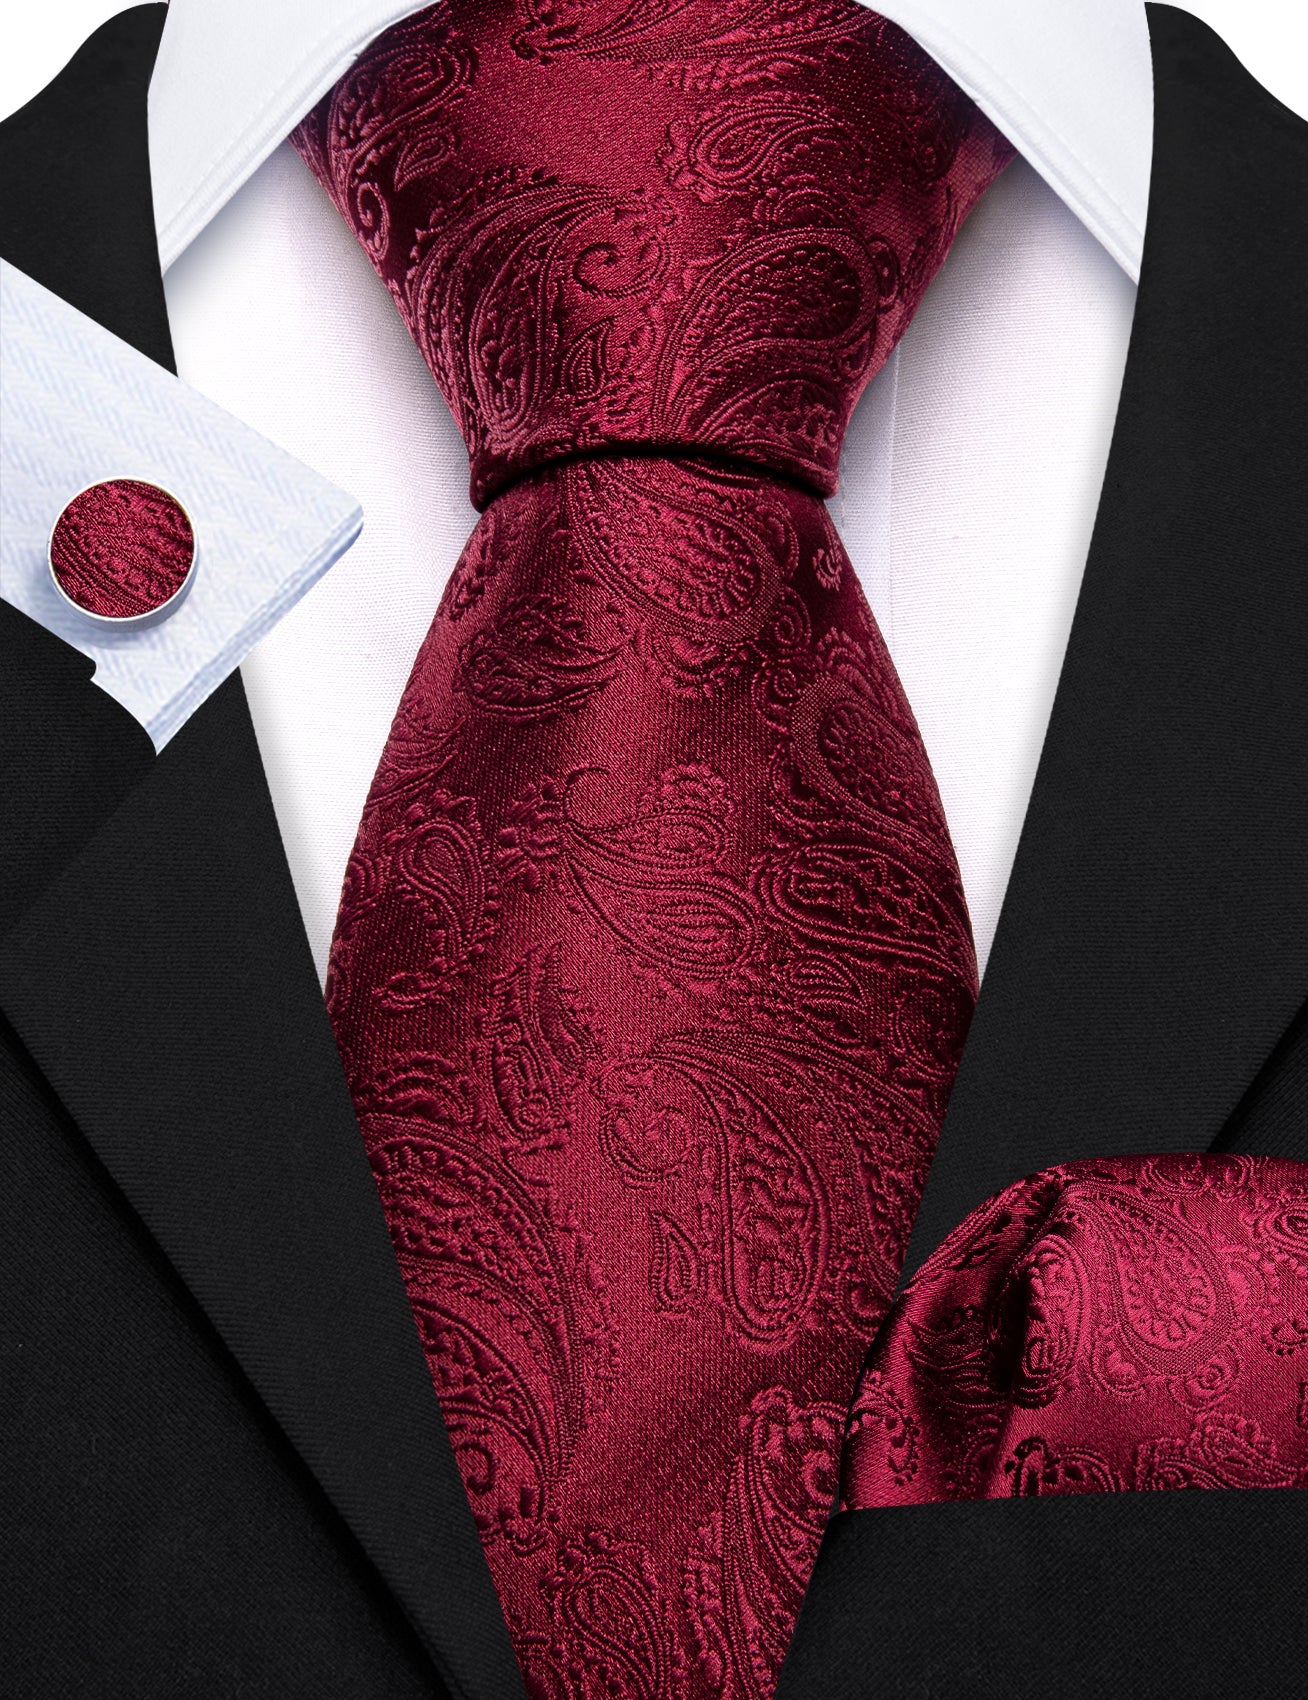 Red Paisley Silk 63 Inches Extra Long Tie Pocket Square Cufflinks Set